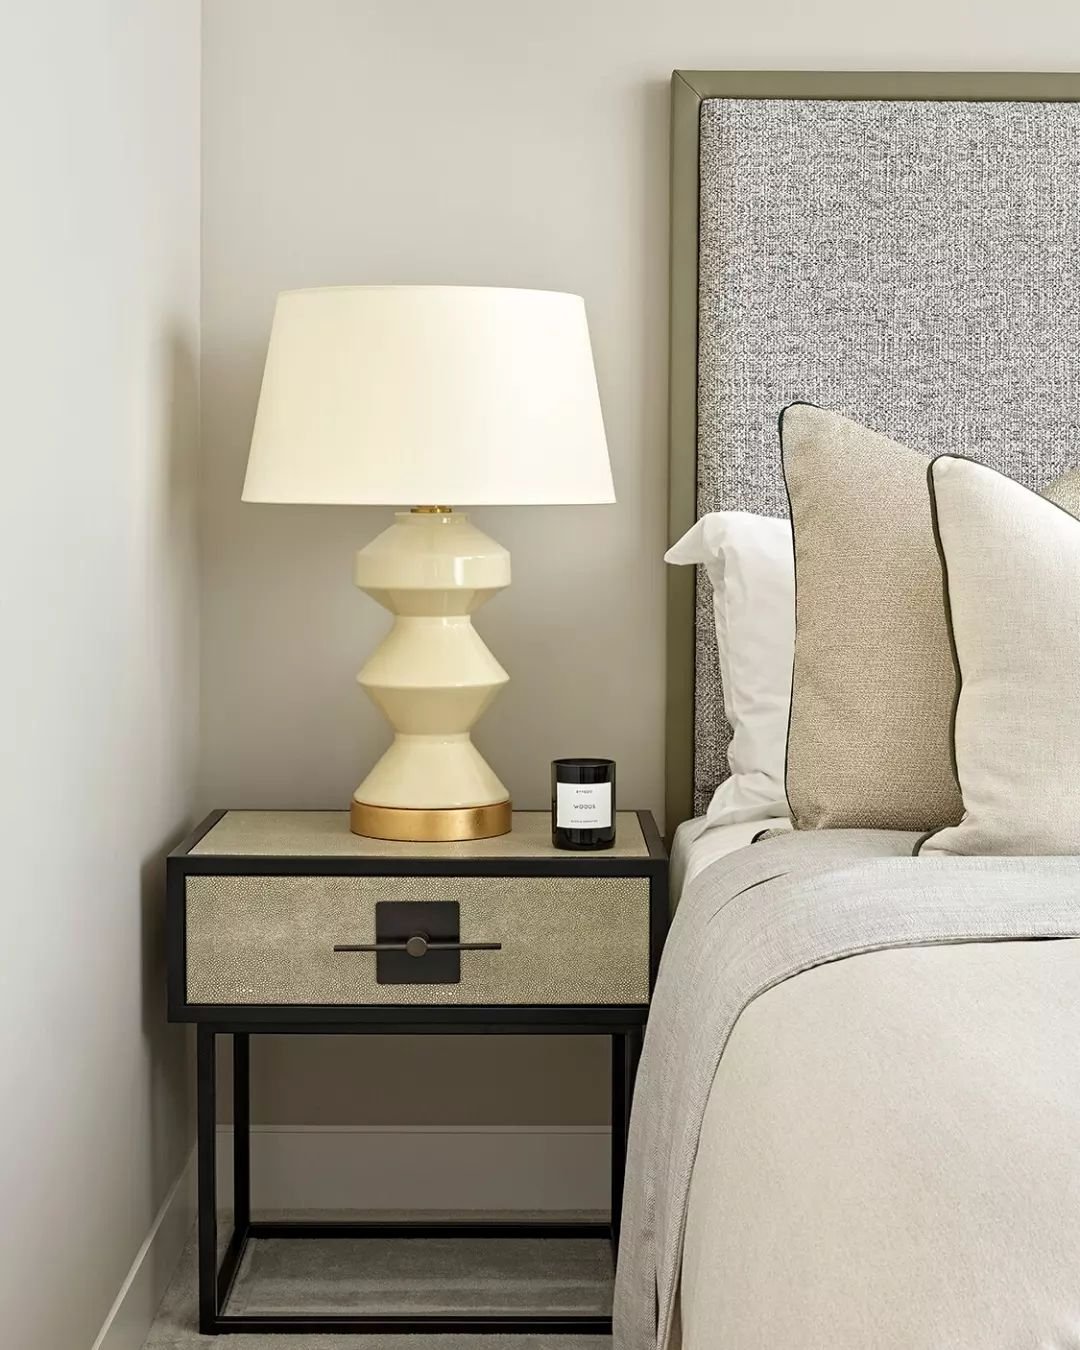 The sun is shining and our yellow-toned lamps and brass features are the perfect way to mirror that in your beautiful home&nbsp;☀️

Our project at Landmark Place has infused these golden hues seamlessly and we can help you do the same&nbsp;🤍 

To fi